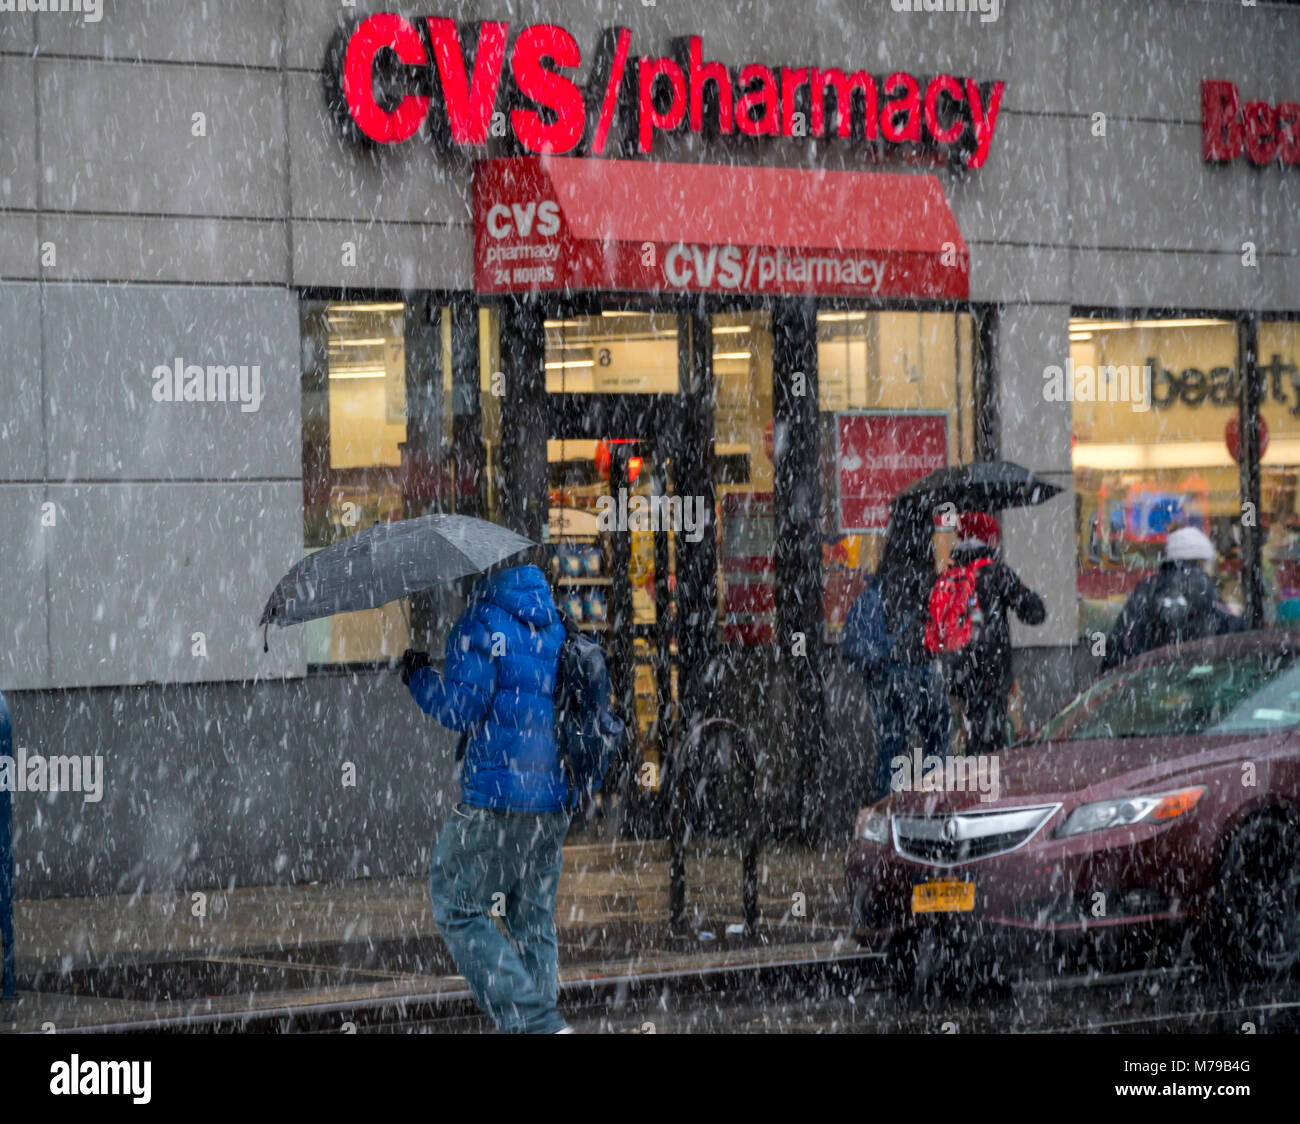 A store in the CVS Health drugstore chain in New York on Sunday, January 21, 2018 is seen during a winter "snowpocalypse". CVS Health's acquisition of Aetna Corp. is affecting its bond rating as the drugstore chain is acquiring $40 billion in new debt. (Â© Richard B. Levine) Stock Photo